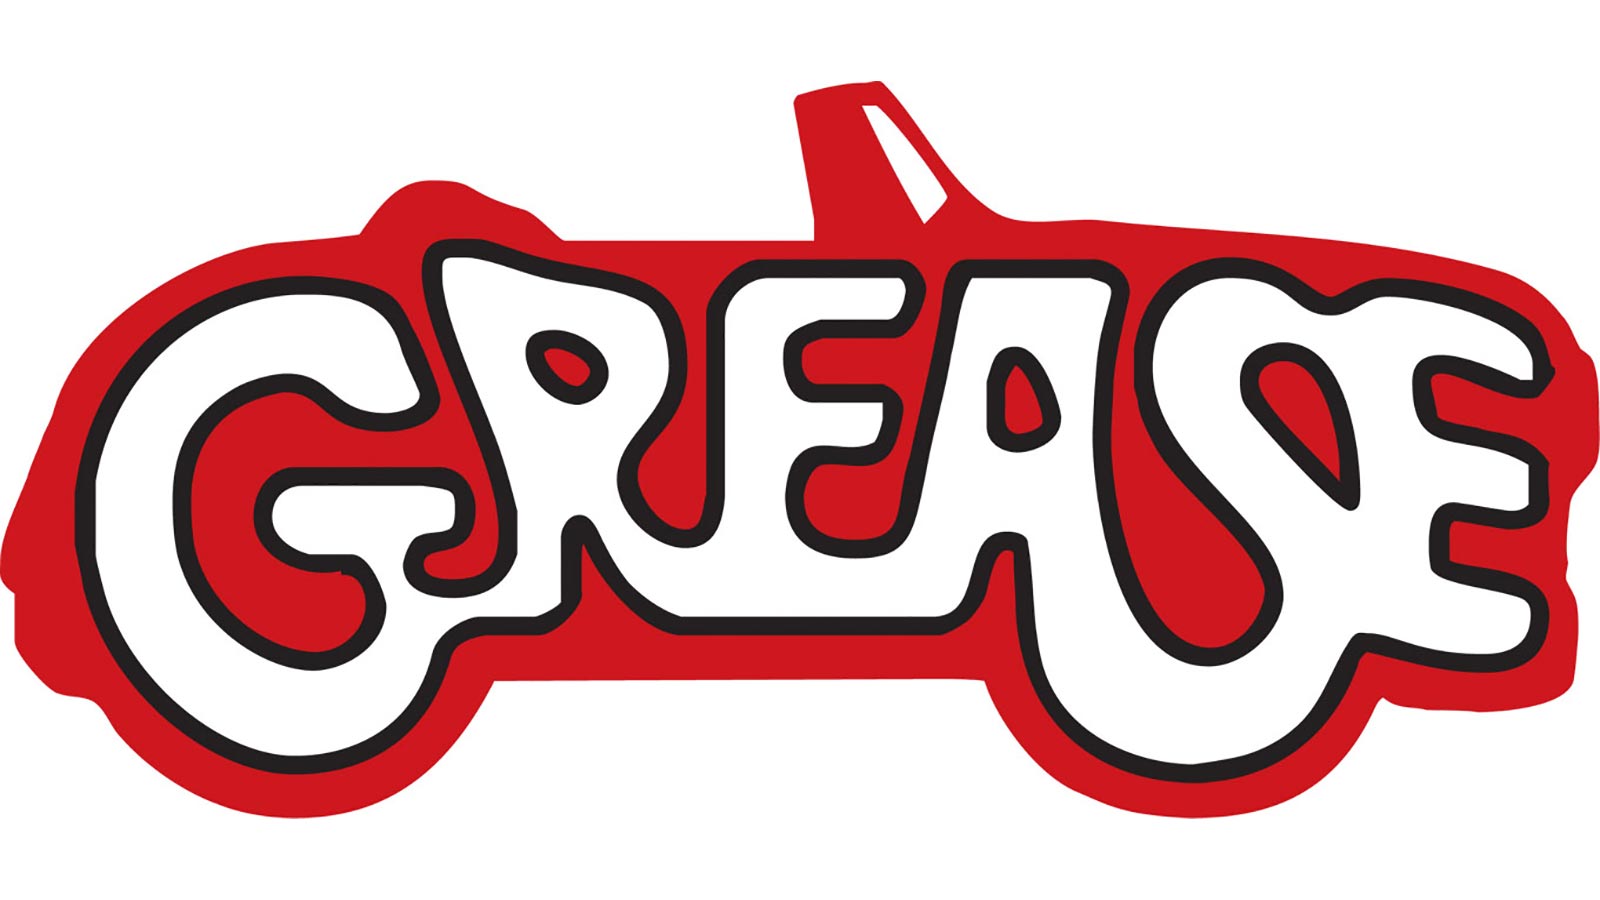 Discover more than 72 grease wallpaper latest - in.cdgdbentre